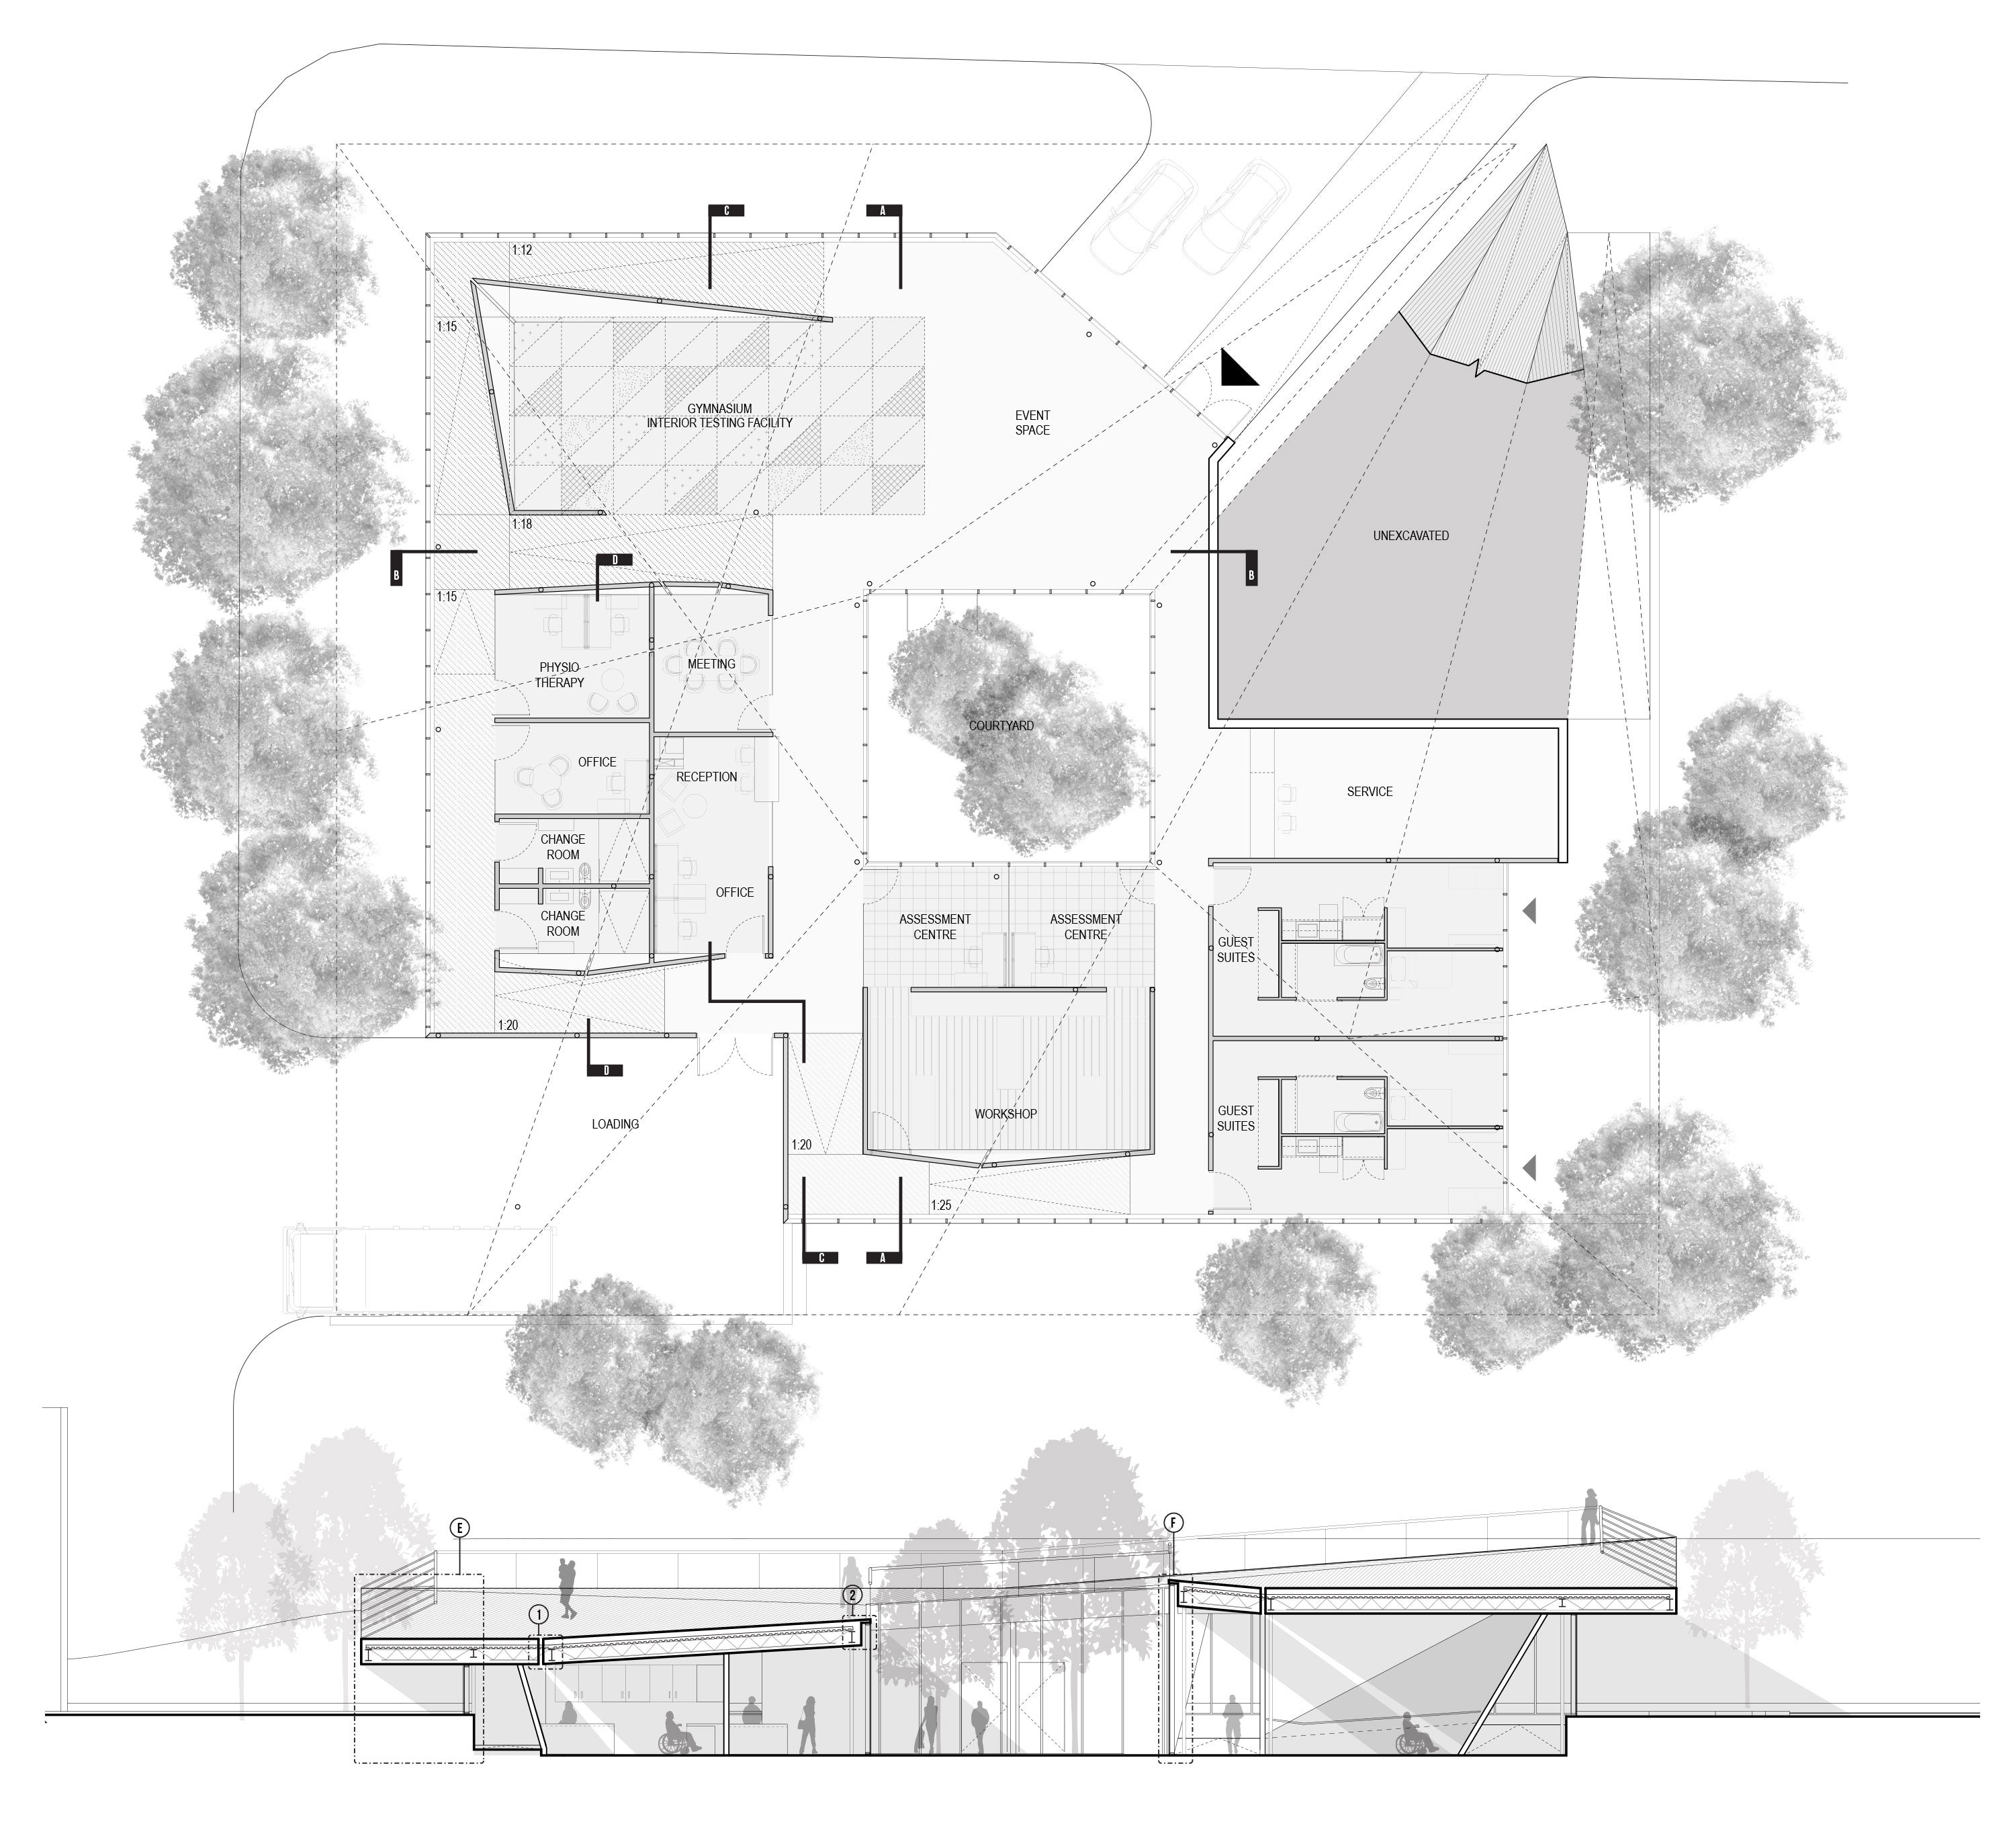 Plan and section drawings of the building design.